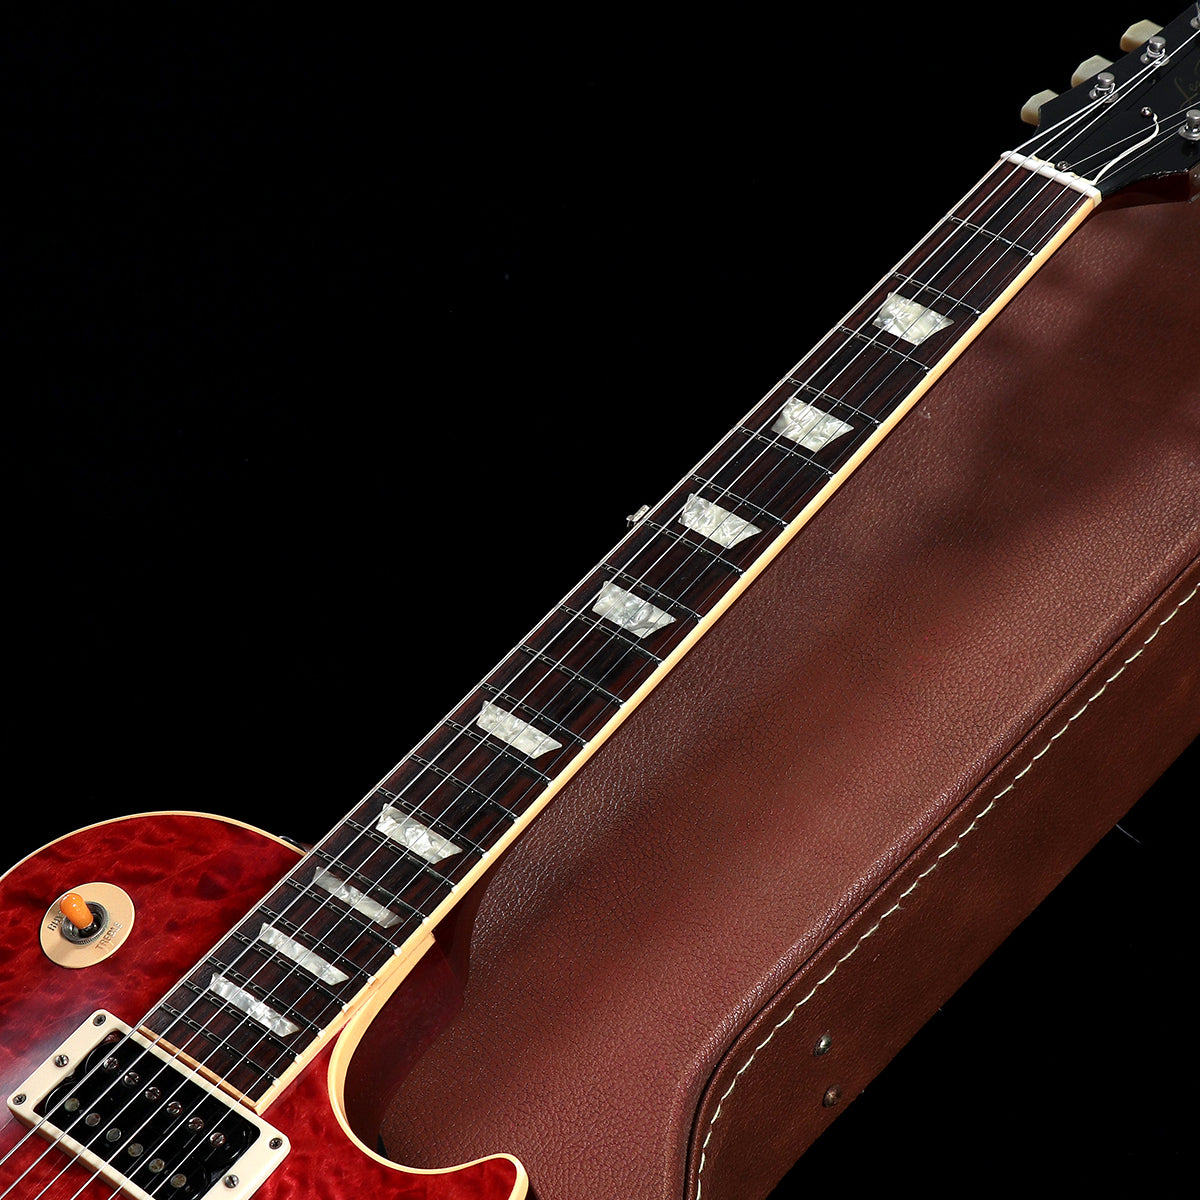 [SN 6  91258] USED Gibson Customshop / 1959 Les Paul Standard Reissue Quit Top 1996 Trans Red [12]